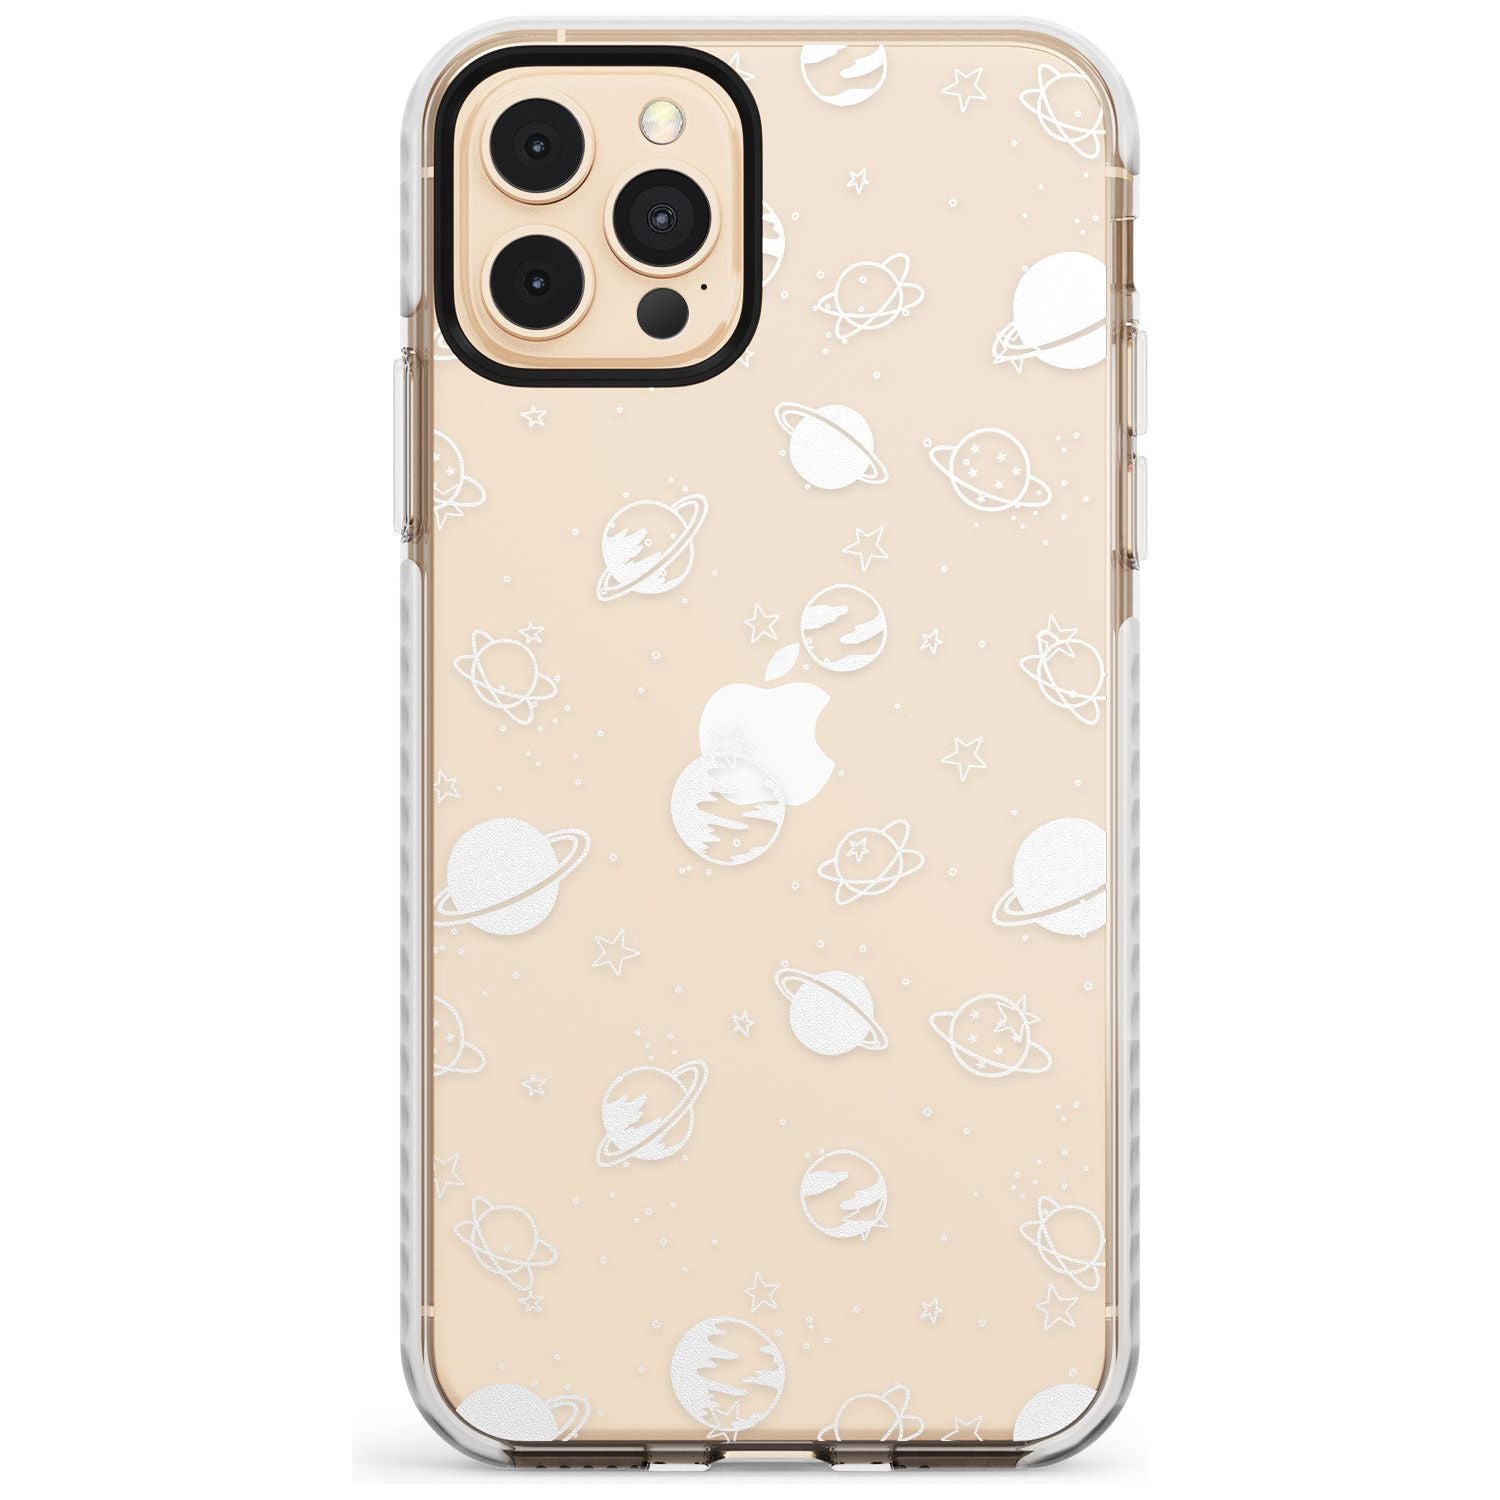 White Planets on Clear Slim TPU Phone Case for iPhone 11 Pro Max